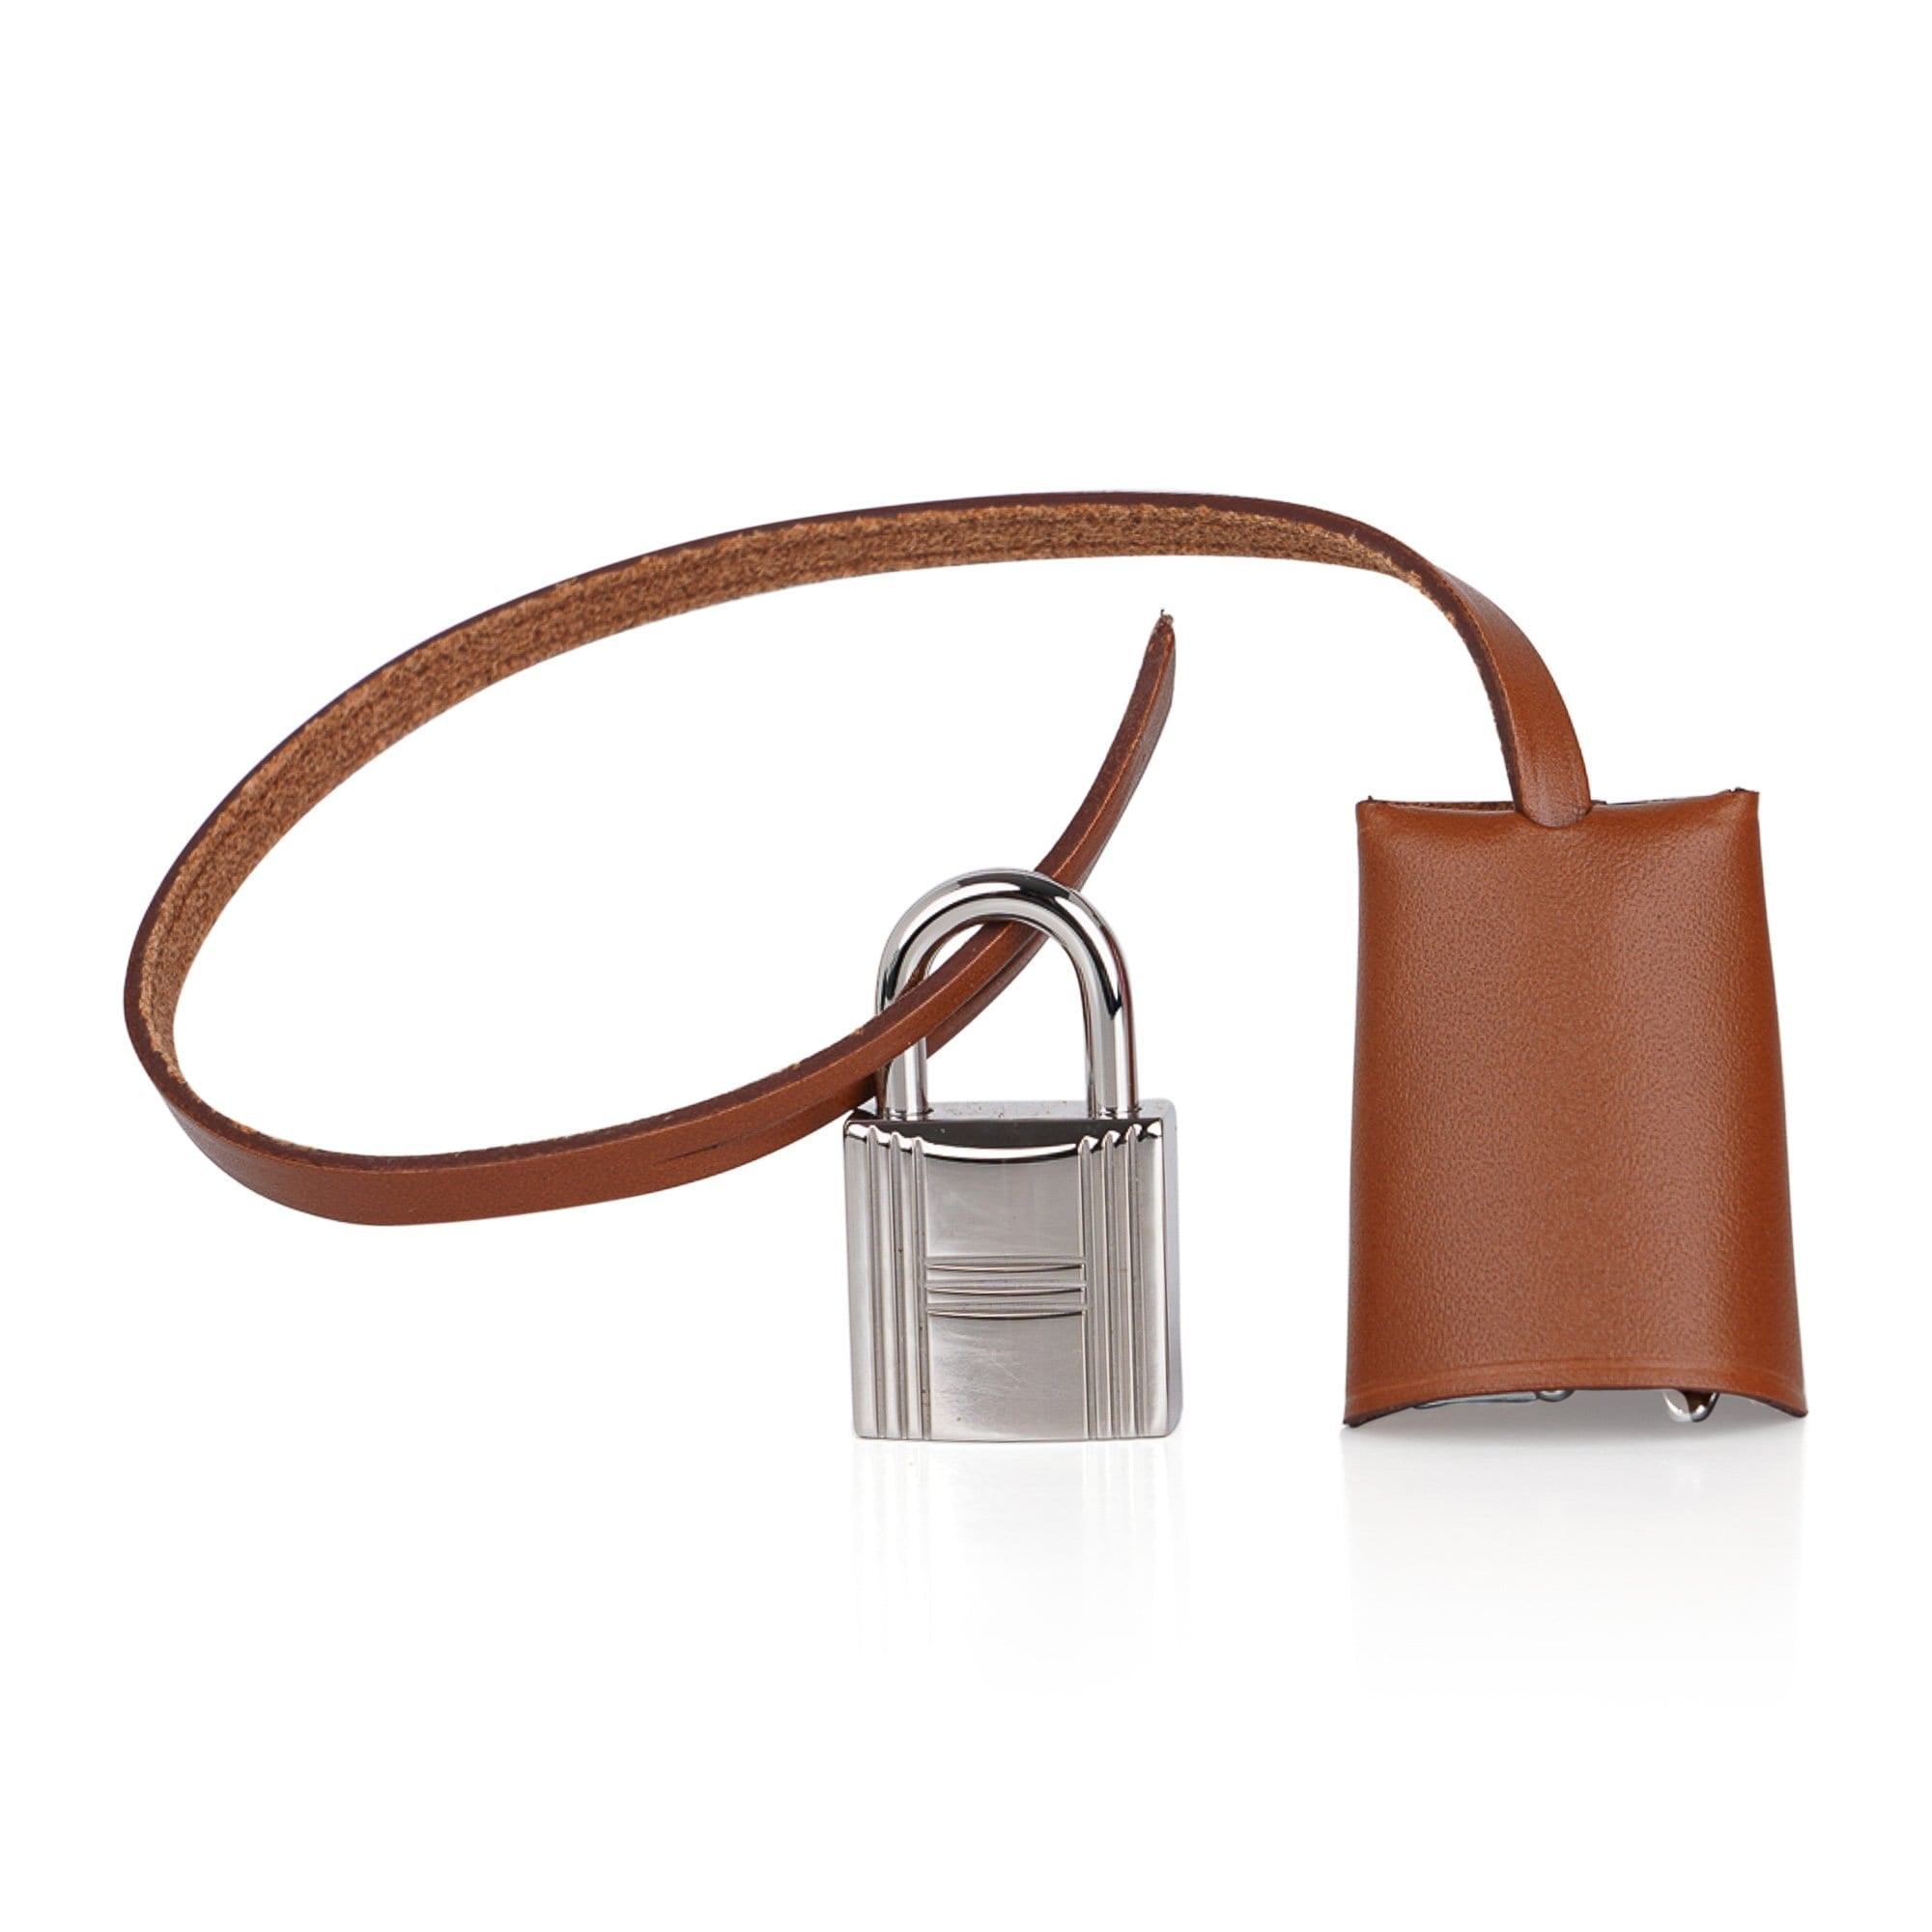 Hermes Herbag Zip Leather and Toile 31 Neutral 2394621